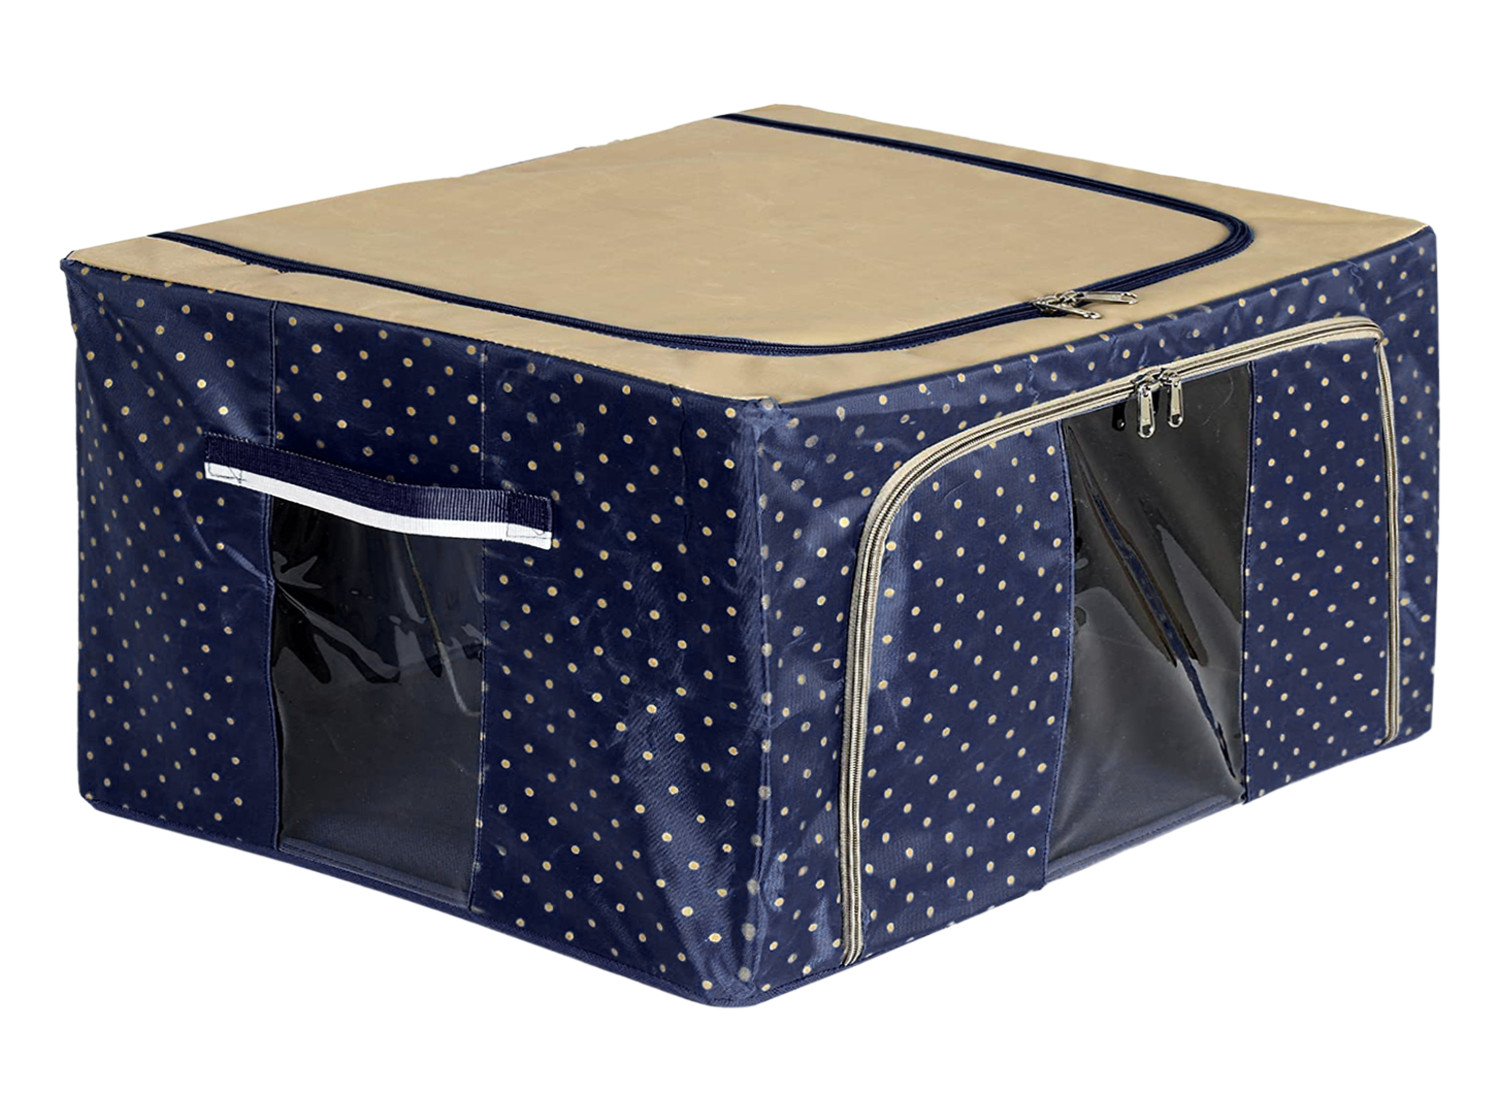 Kuber Industries Dot Printed Steel Frame Storage Box/Organizer For Clothing, Blankets, Bedding With Clear Window, 24Ltr. (Navy Blue & Brown)